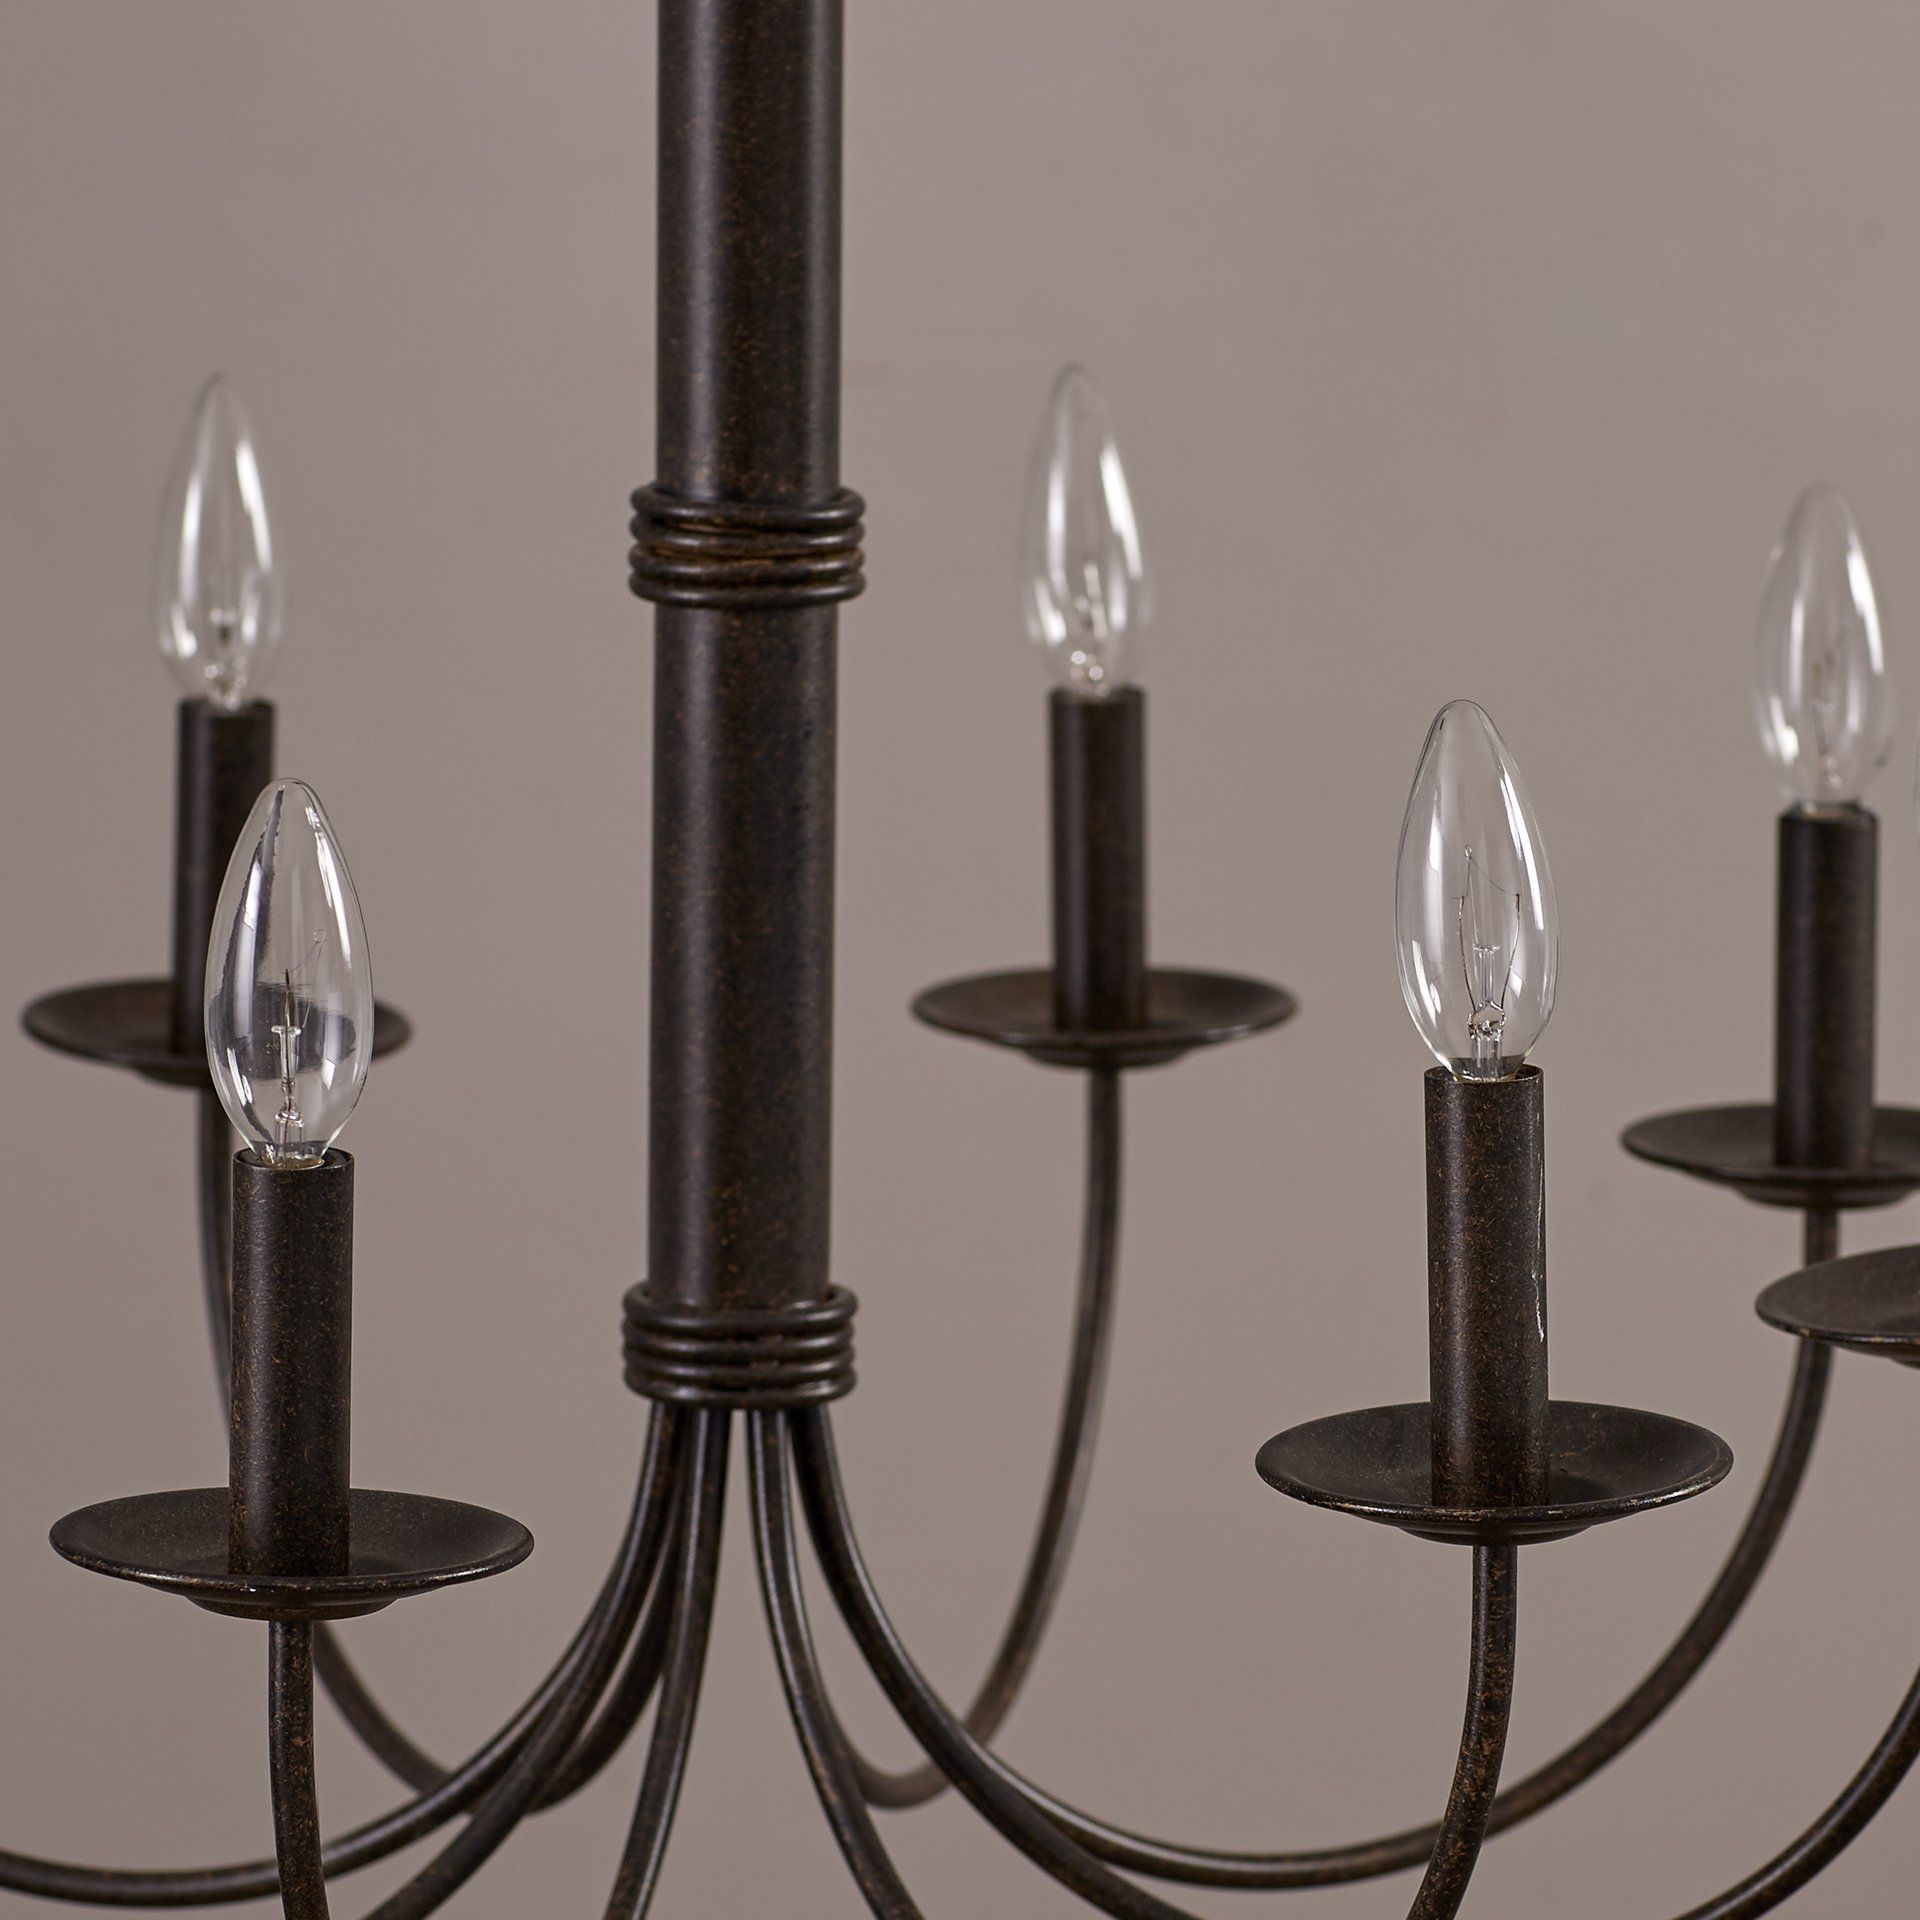 Lark Manor 8 Light Candle Style Chandelier Reviews Wayfair With Candle Light Chandelier (View 5 of 12)